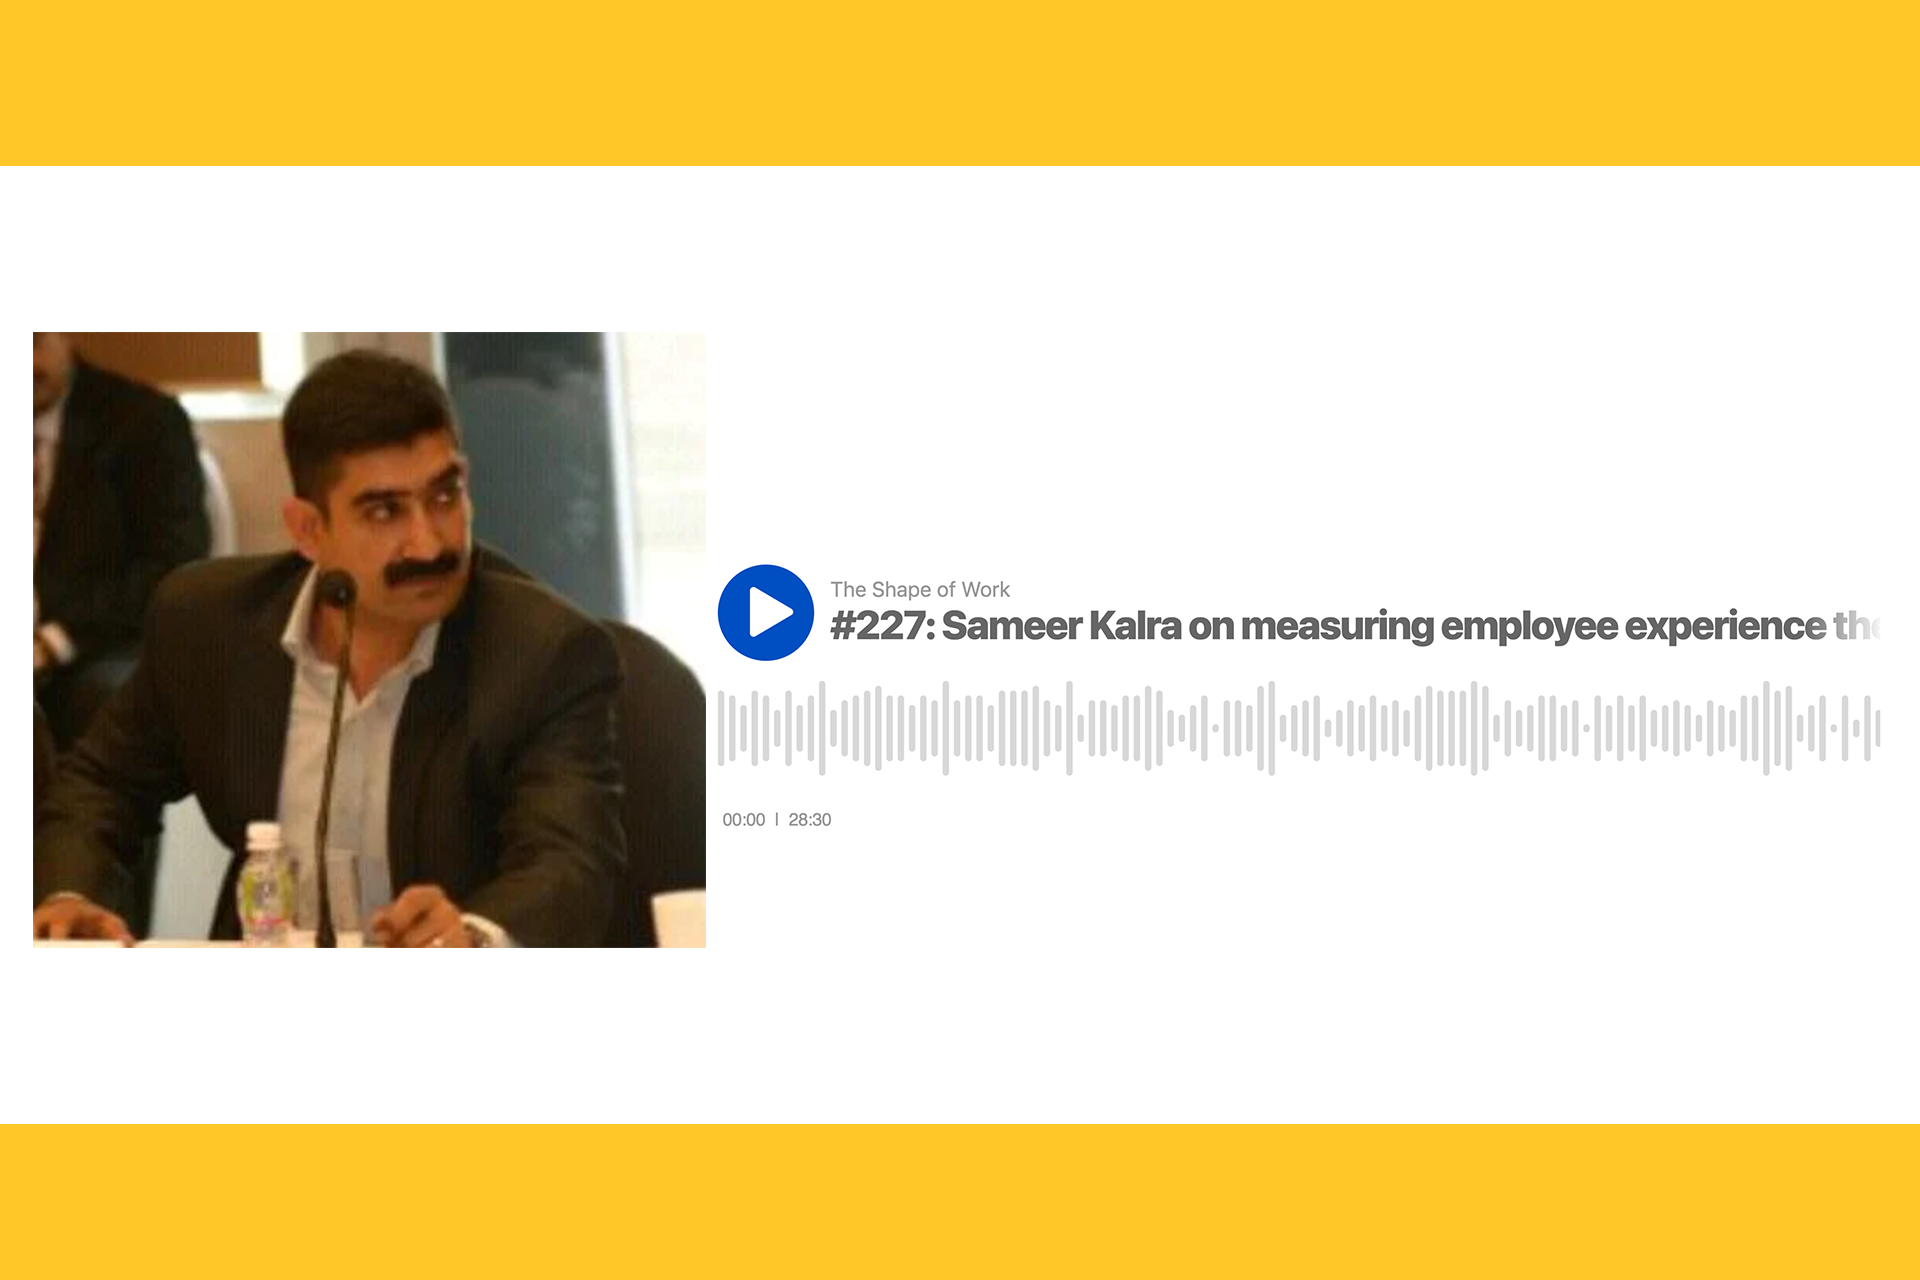 Sameer Kalra on measuring employee experience the right way incorporating a listening culture and car as a perk to all employees